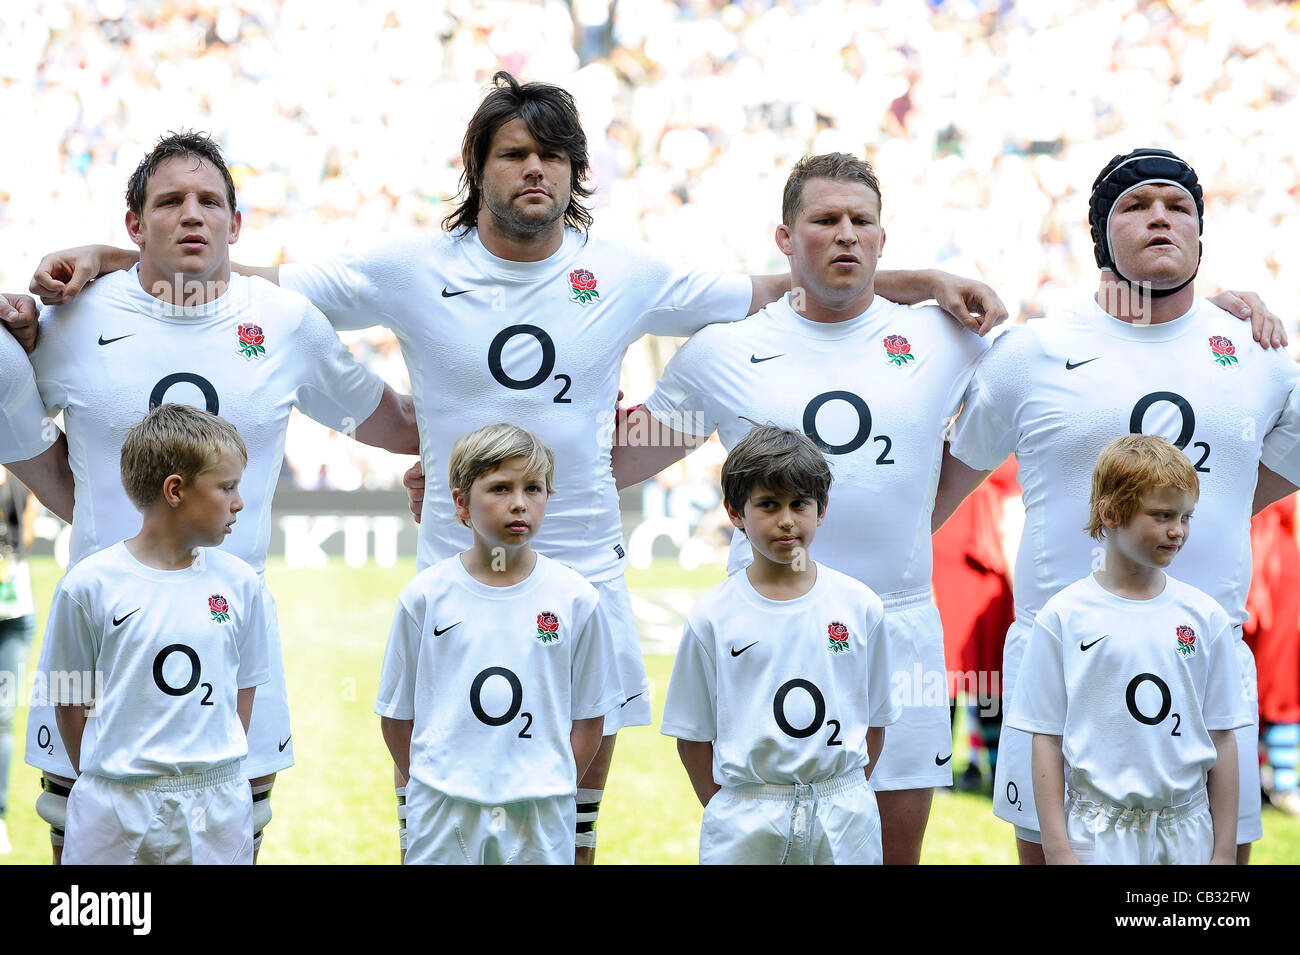 27.05.2012 Richmond, England. England players line up for the National Anthem before the The Killik Cup Rugby Union clash between England and the Barbarians invitational side at Twickenham Stadium. Stock Photo